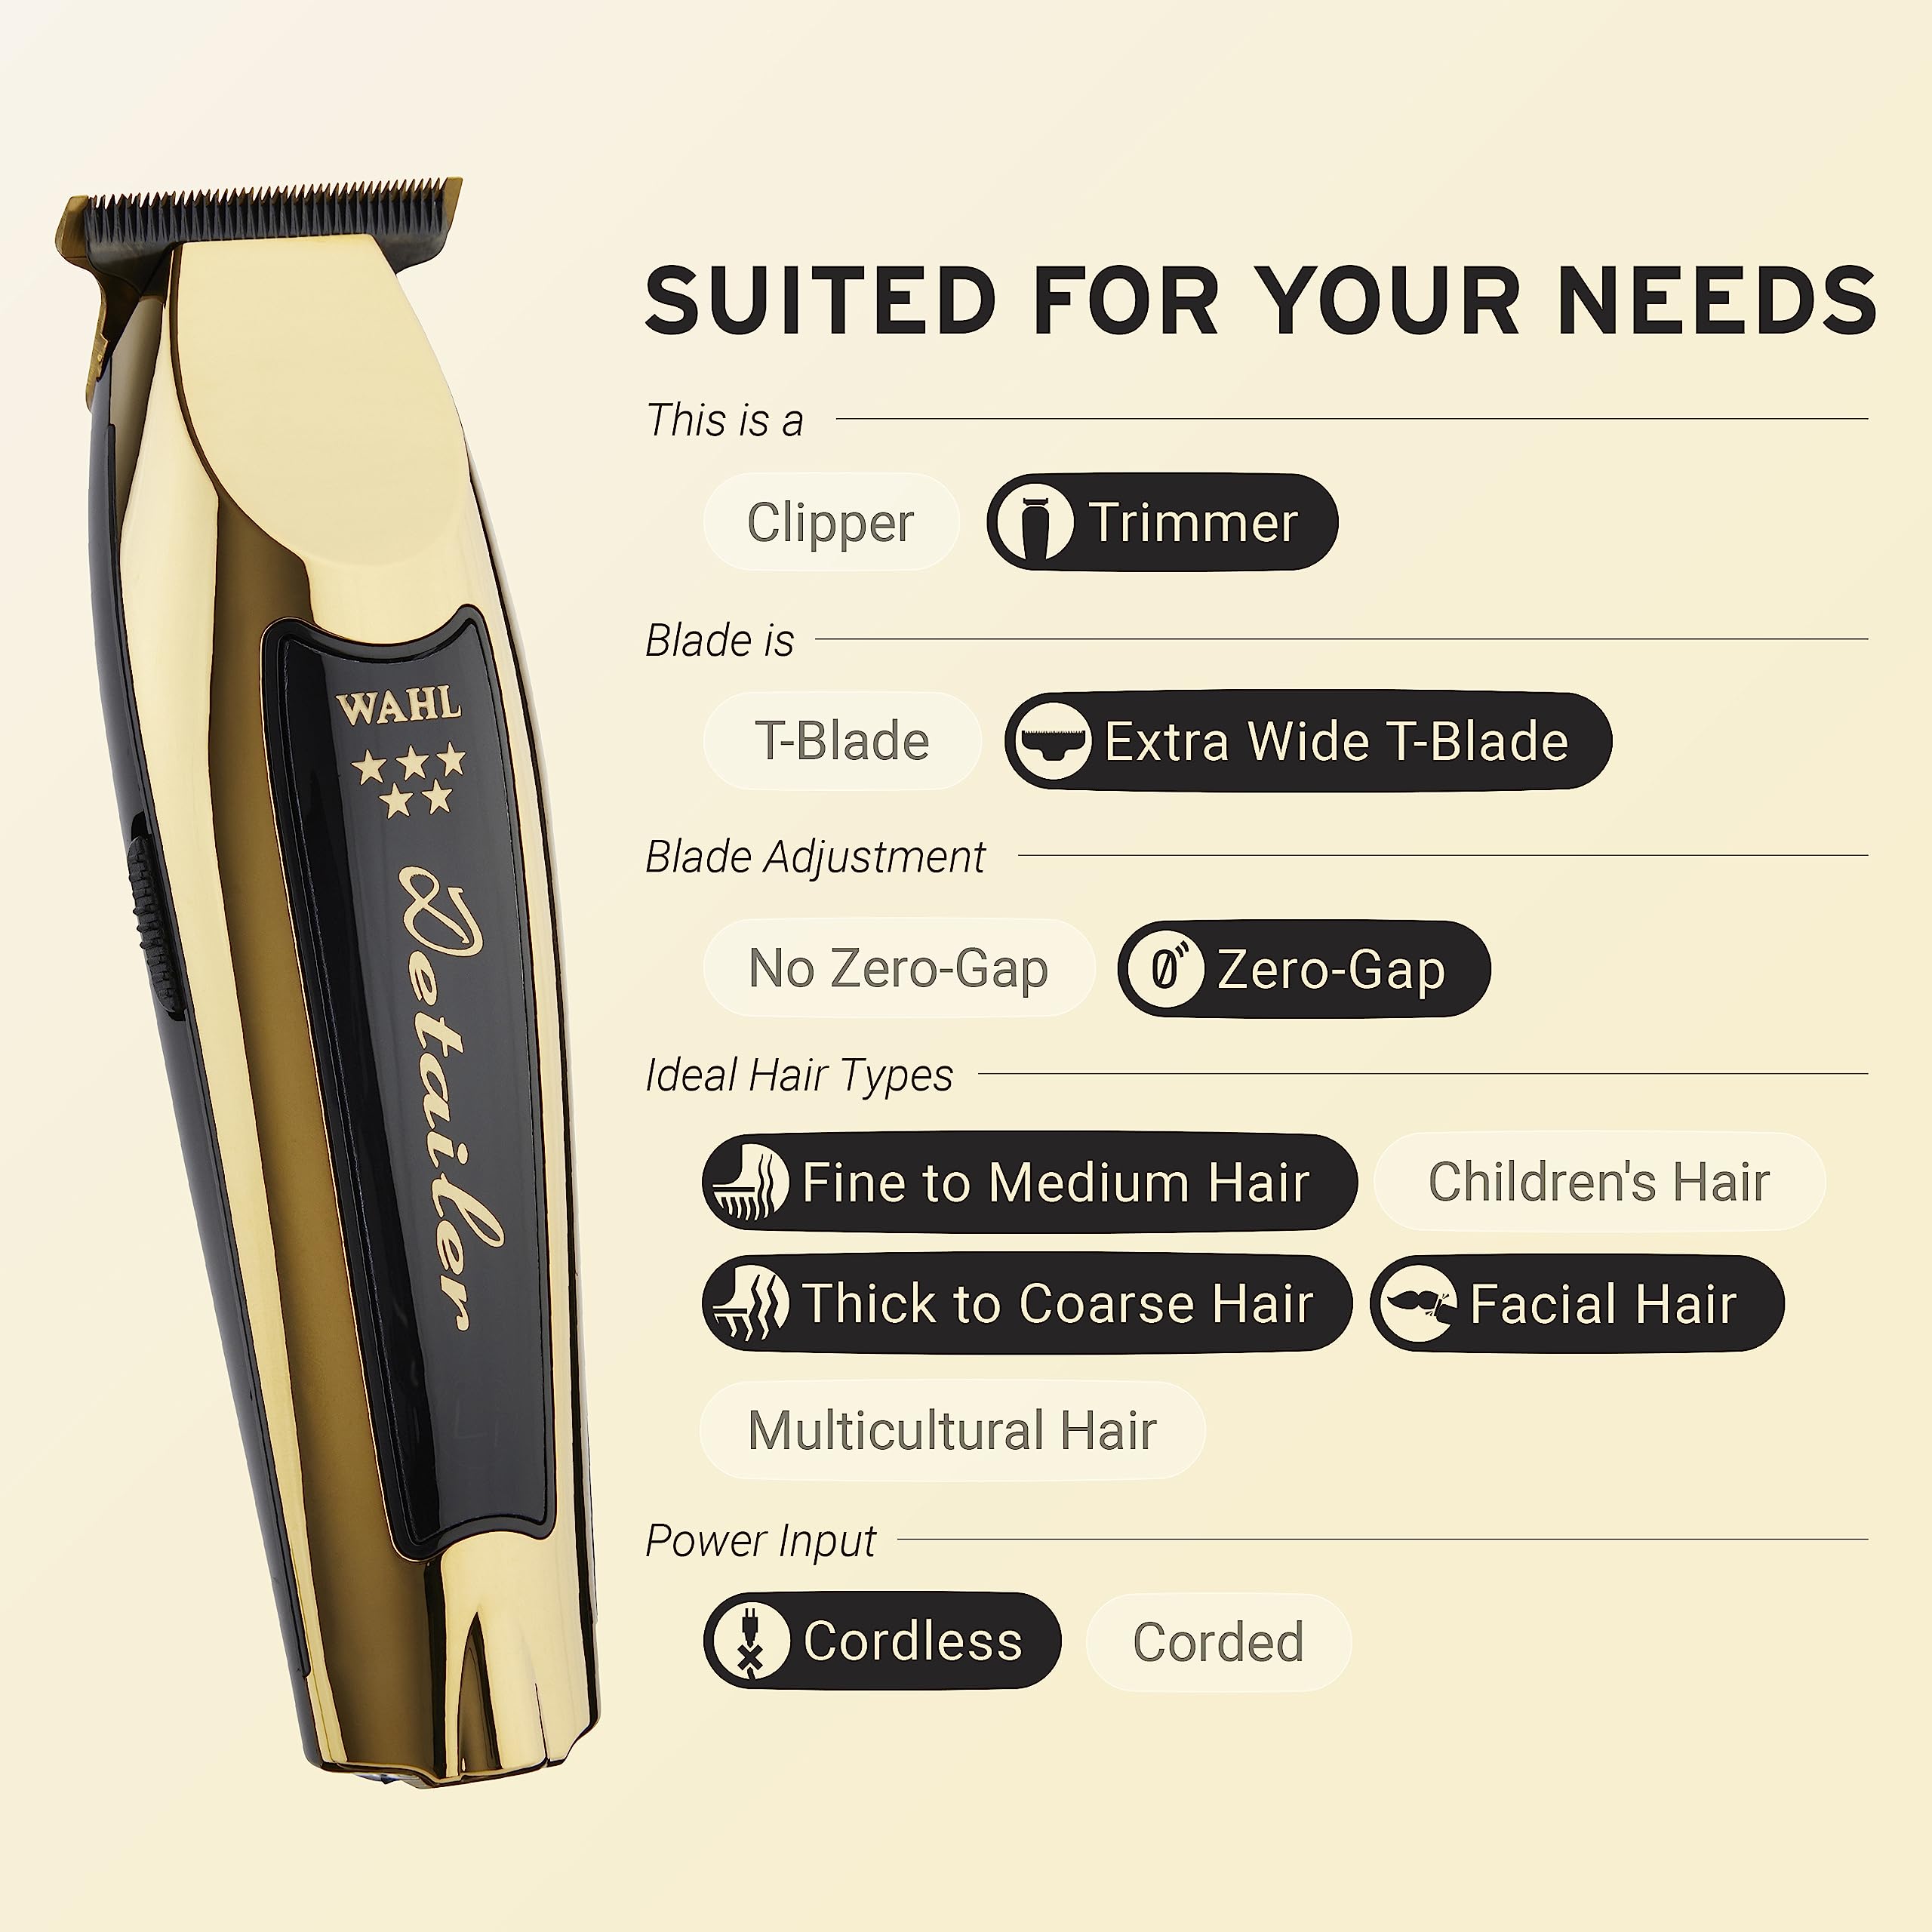 Wahl Professional 5 Star Gold Cordless Detailer Li Trimmer for Professional Barbers and Stylists